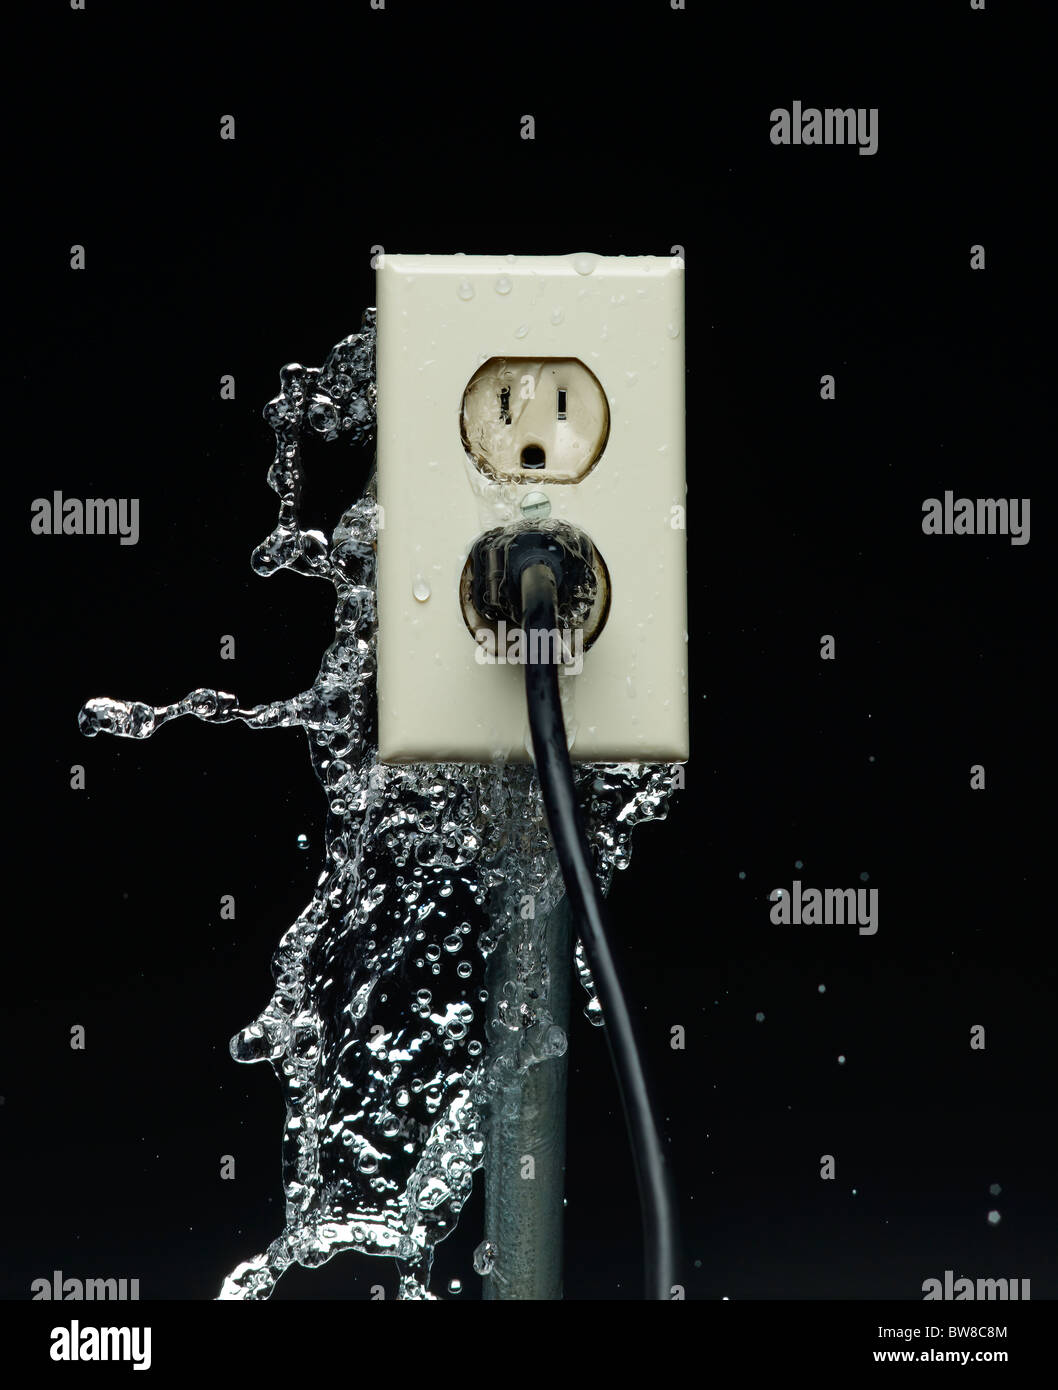 Electrical outlet leaking water Stock Photo